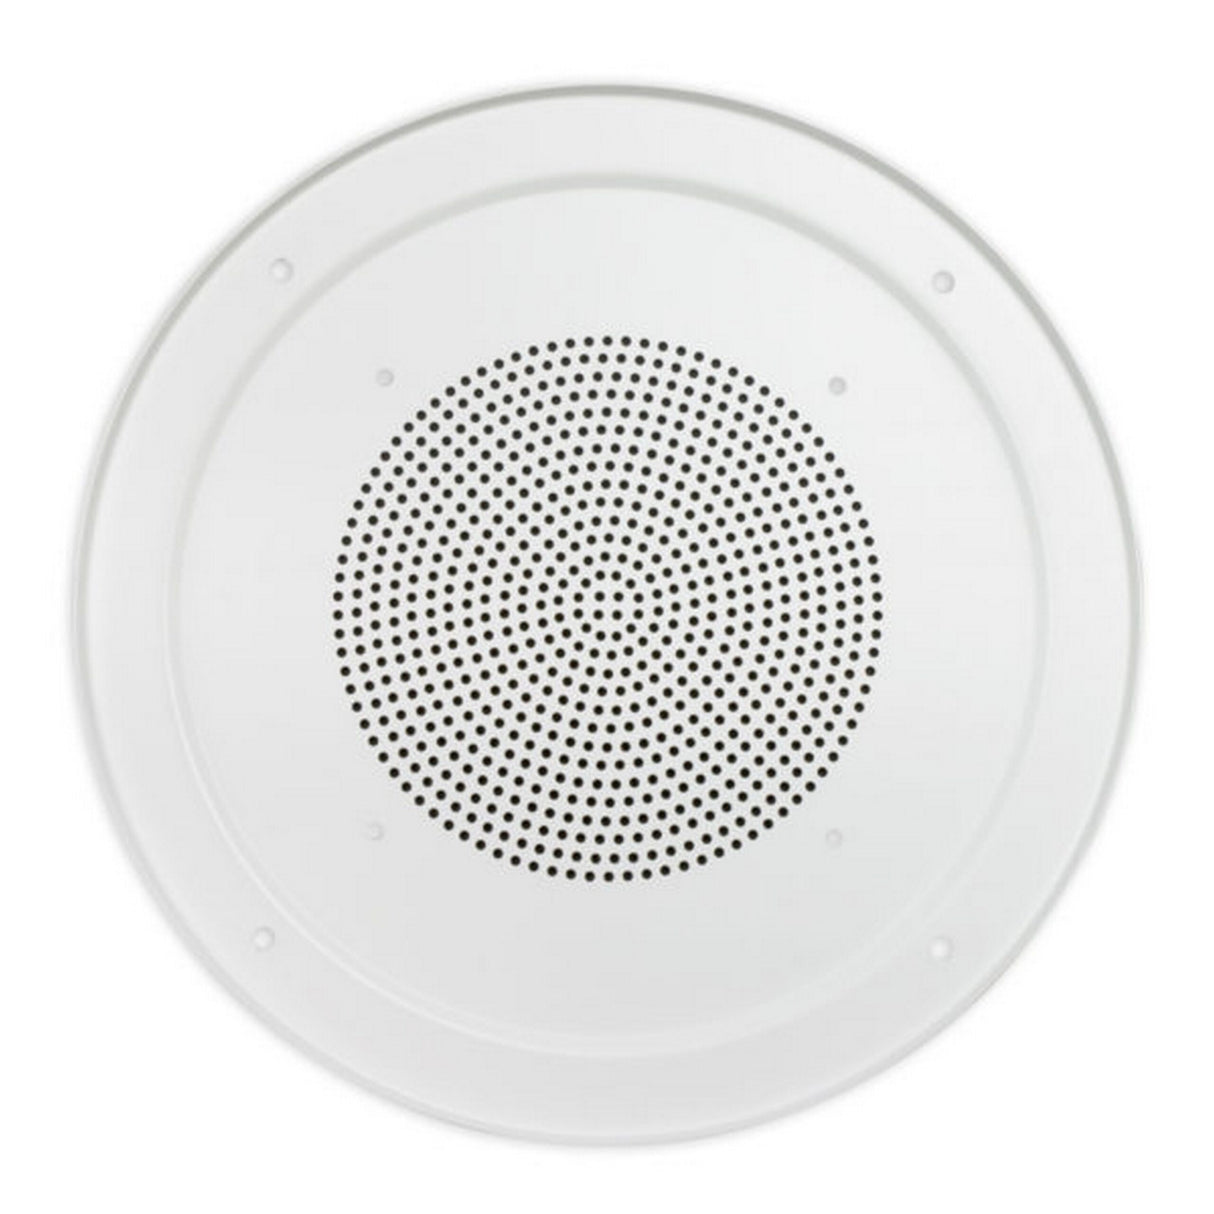 Lowell RS8-AW Grille for 8-Inch Speaker, White